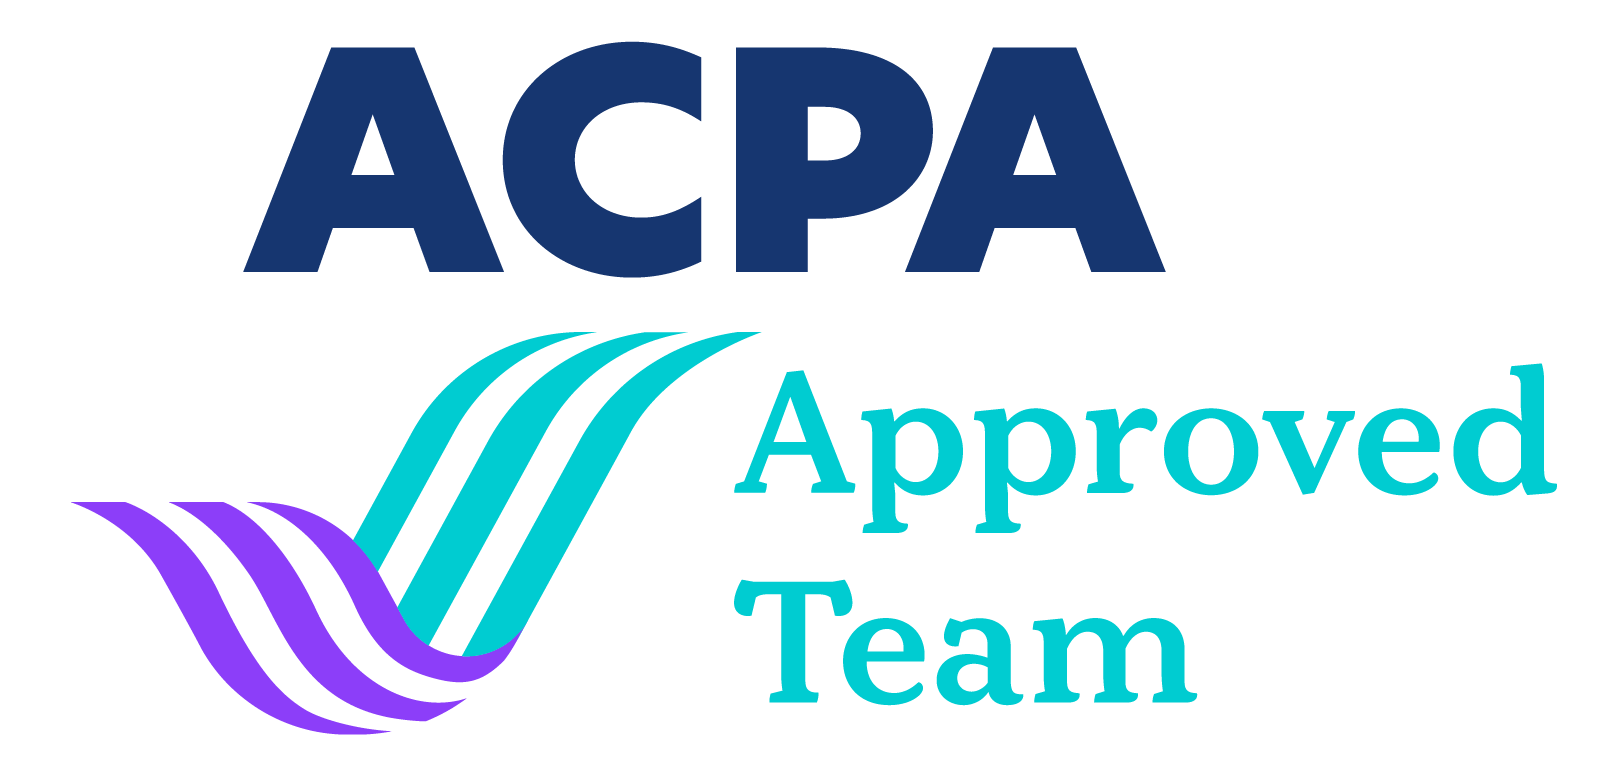  ACPA Approved Team logo